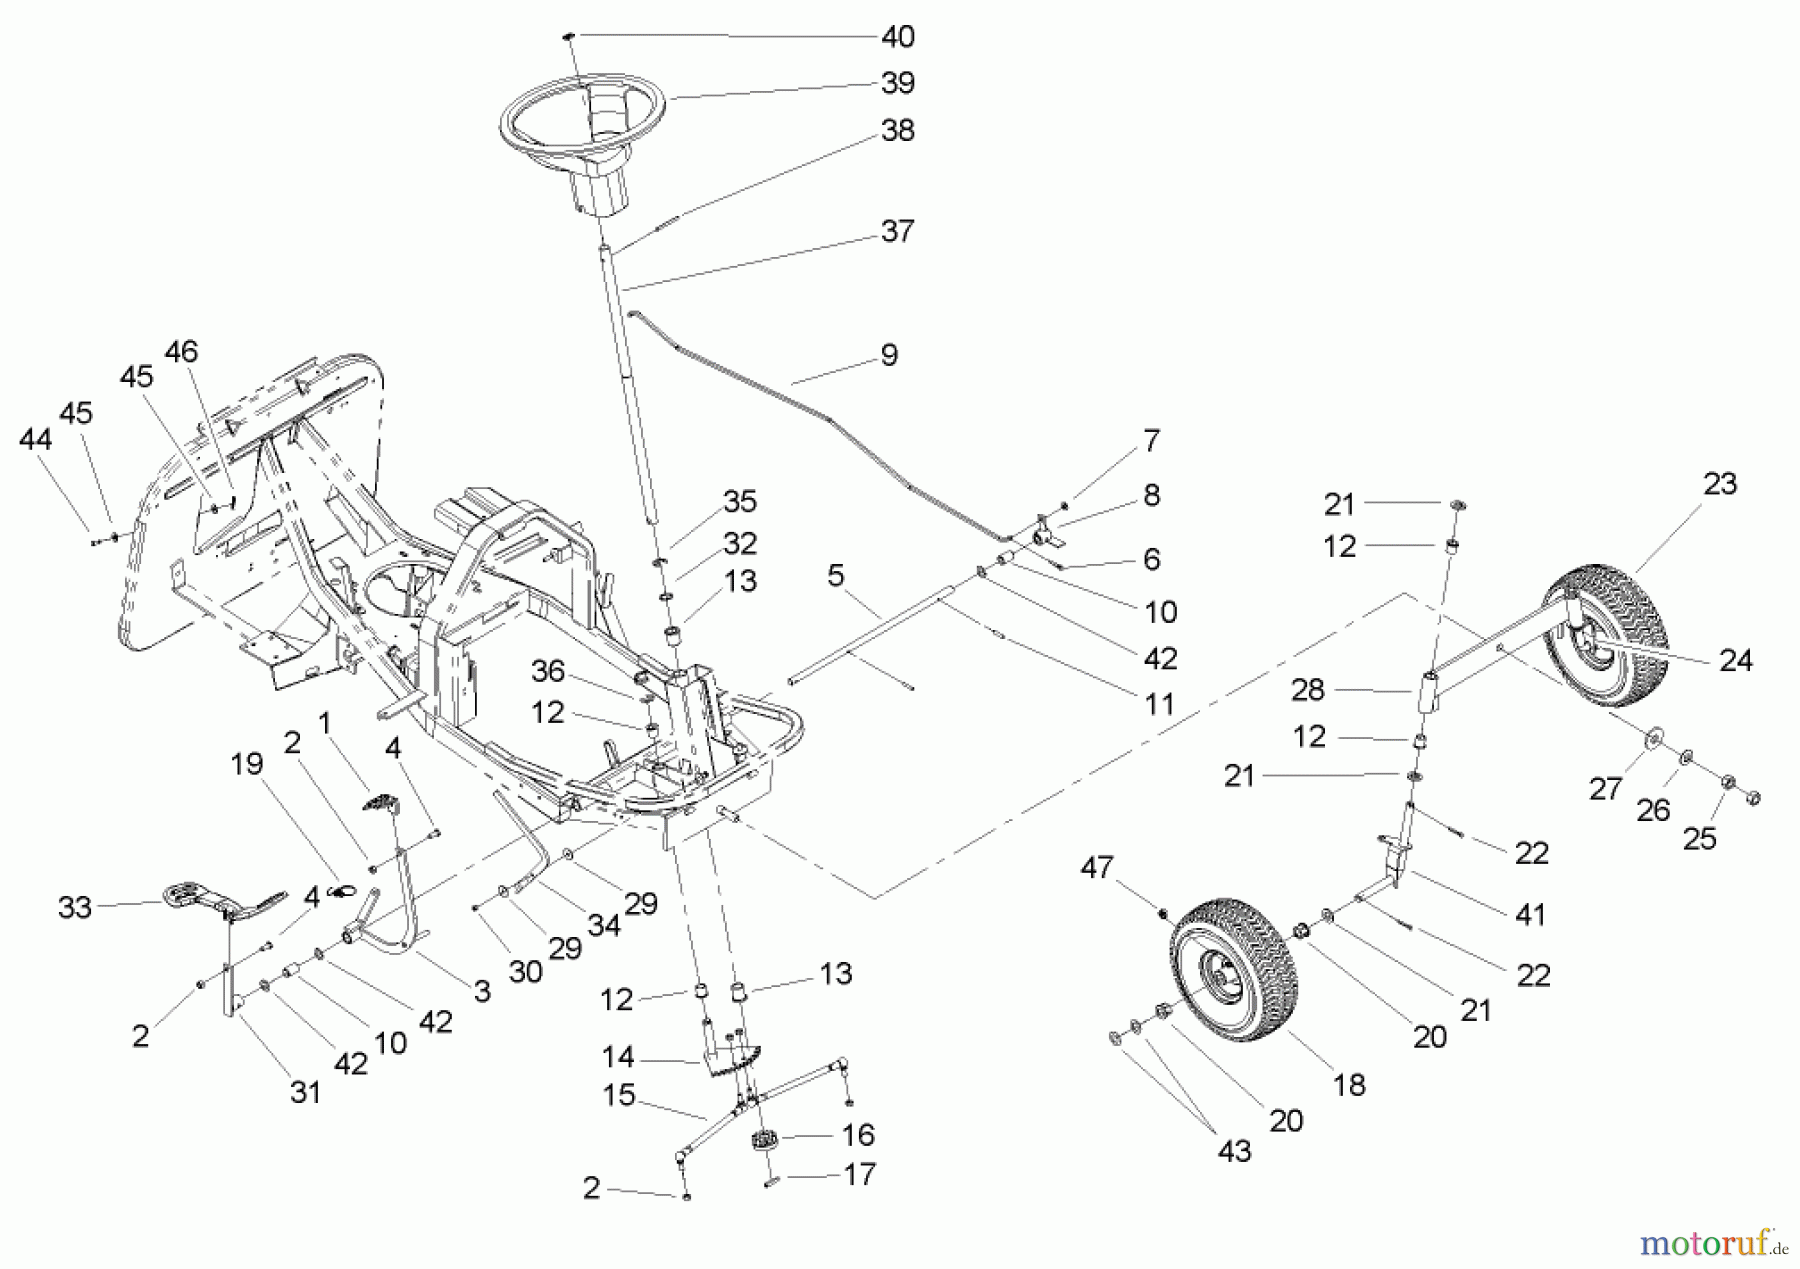  Toro Neu Mowers, Rear-Engine Rider 70186 (H132) - Toro H132 Rear-Engine Riding Mower, 2006 (260000001-260999999) FRONT AXLE AND STEERING ASSEMBLY